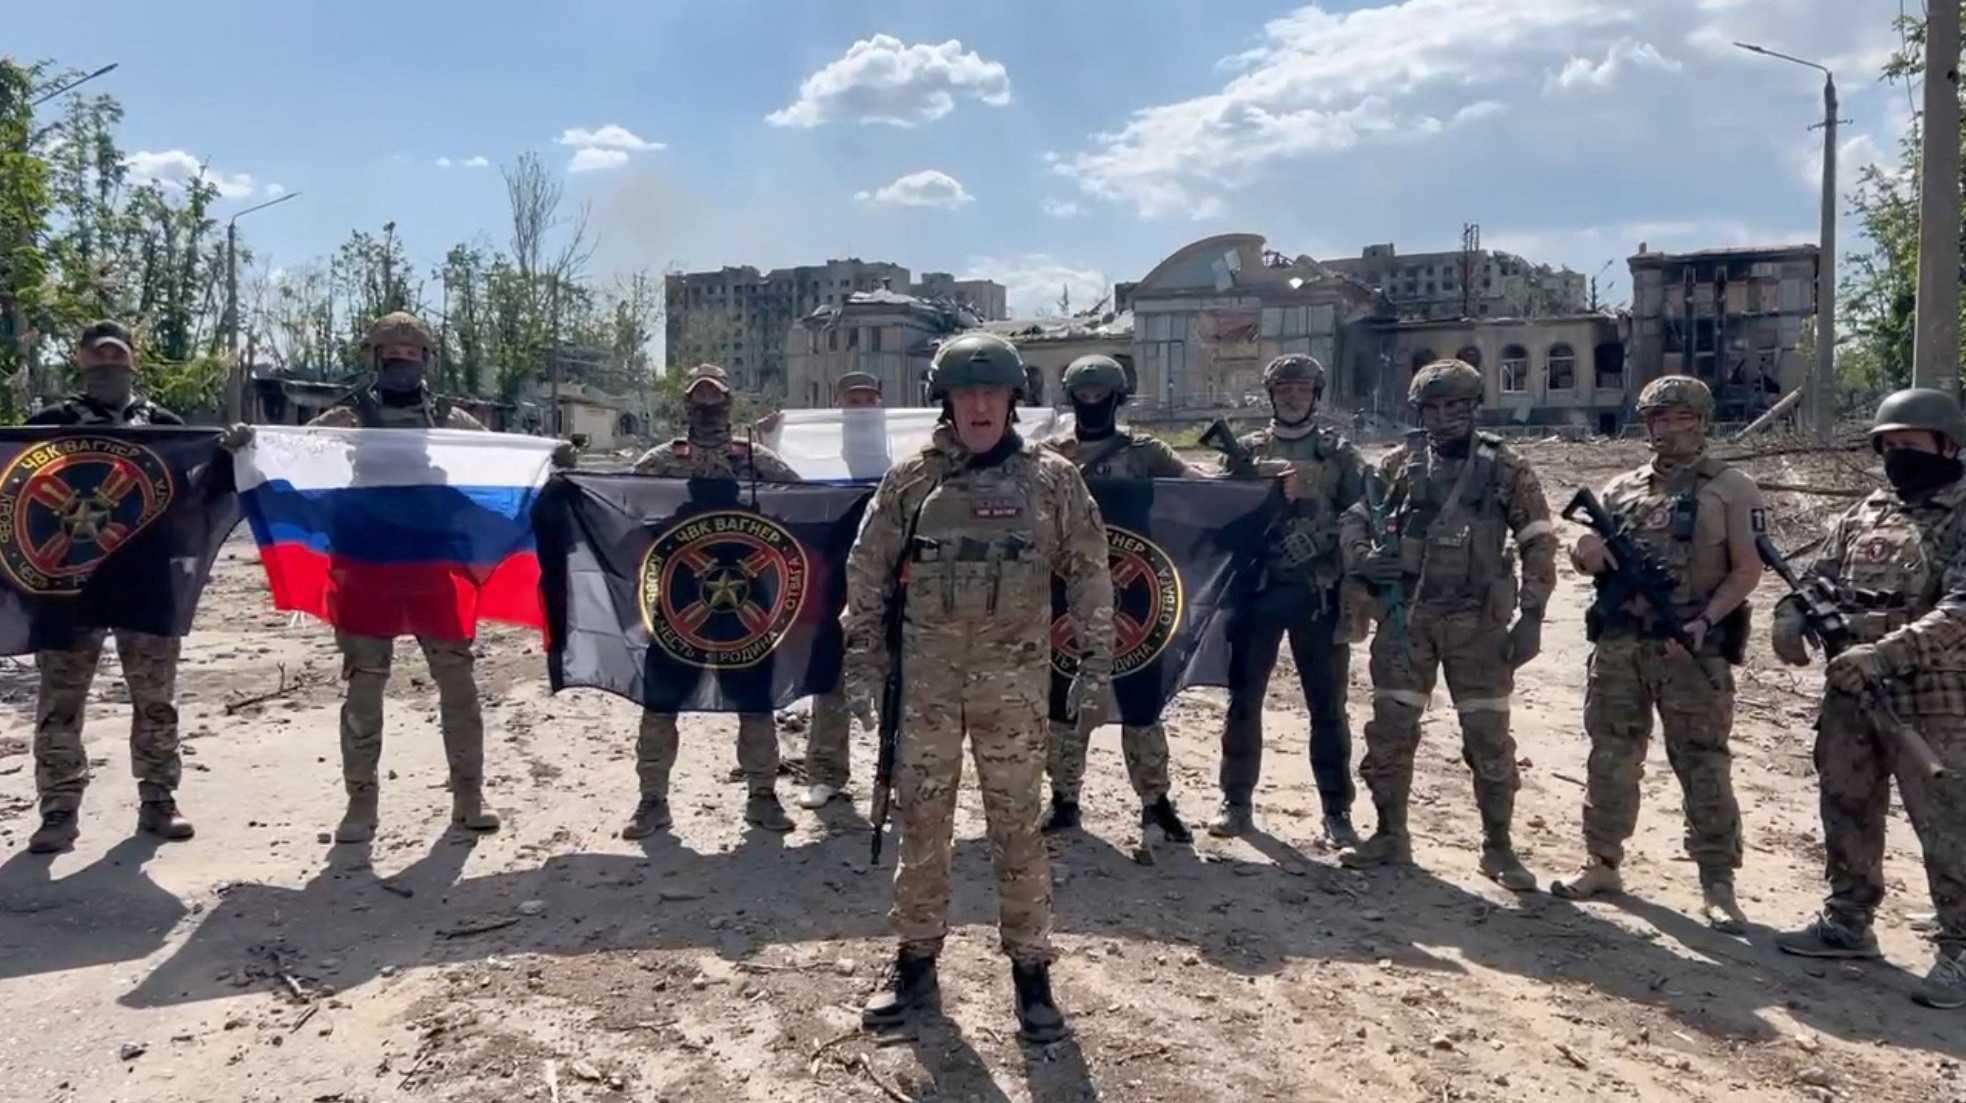 Founder of Wagner private mercenary group Yevgeny Prigozhin makes a statement as he stands next to Wagner fighters in the course of Russia-Ukraine conflict in Bakhmut, Ukraine, in this still image taken from video released May 20. Photo: Reuters